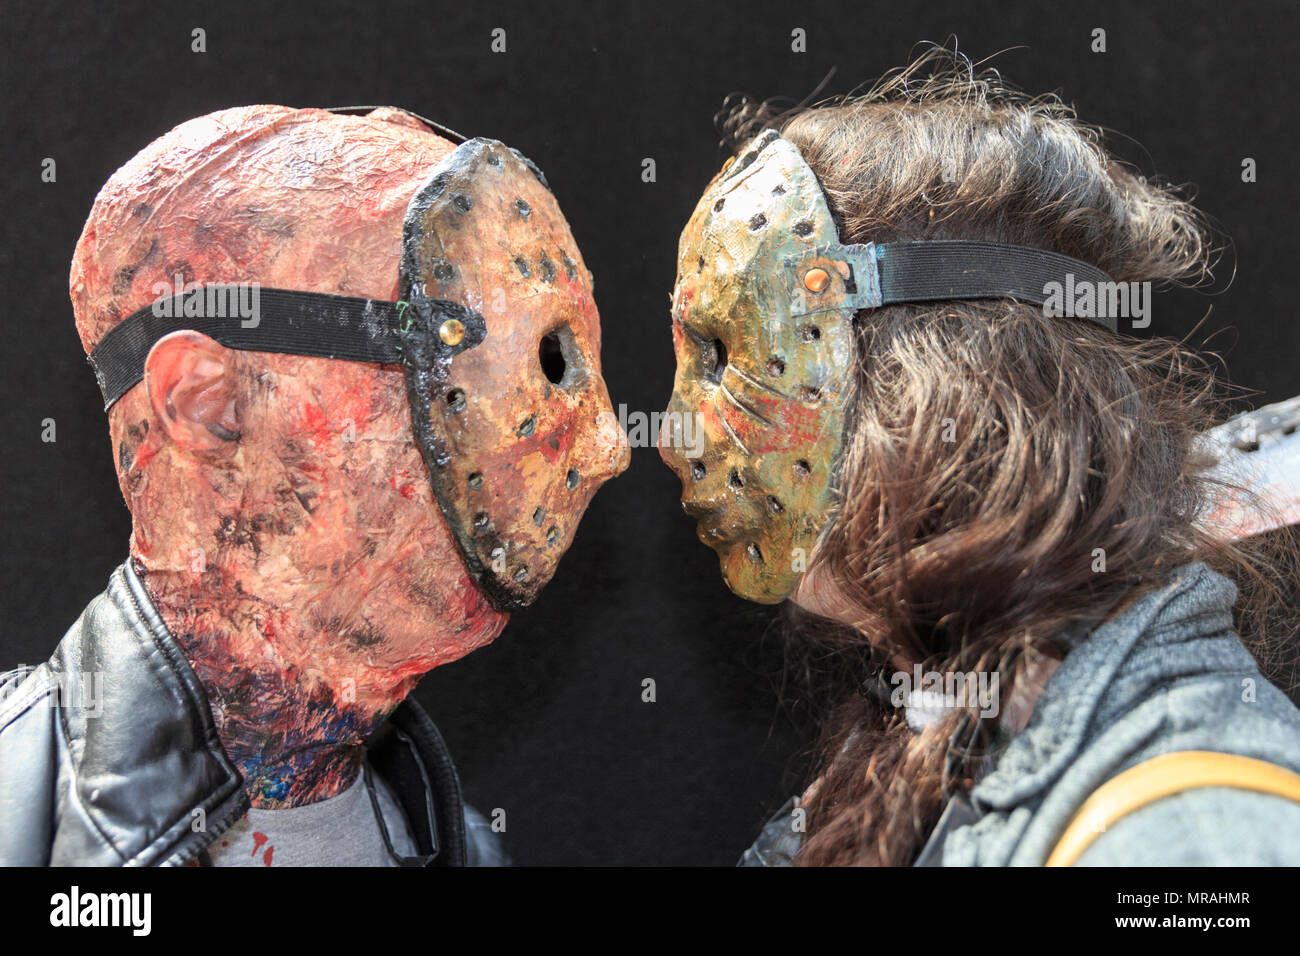 Jason Voorhees Costumes High Resolution Stock Photography And Images Alamy - jason voorhees part 4 mask decal roblox